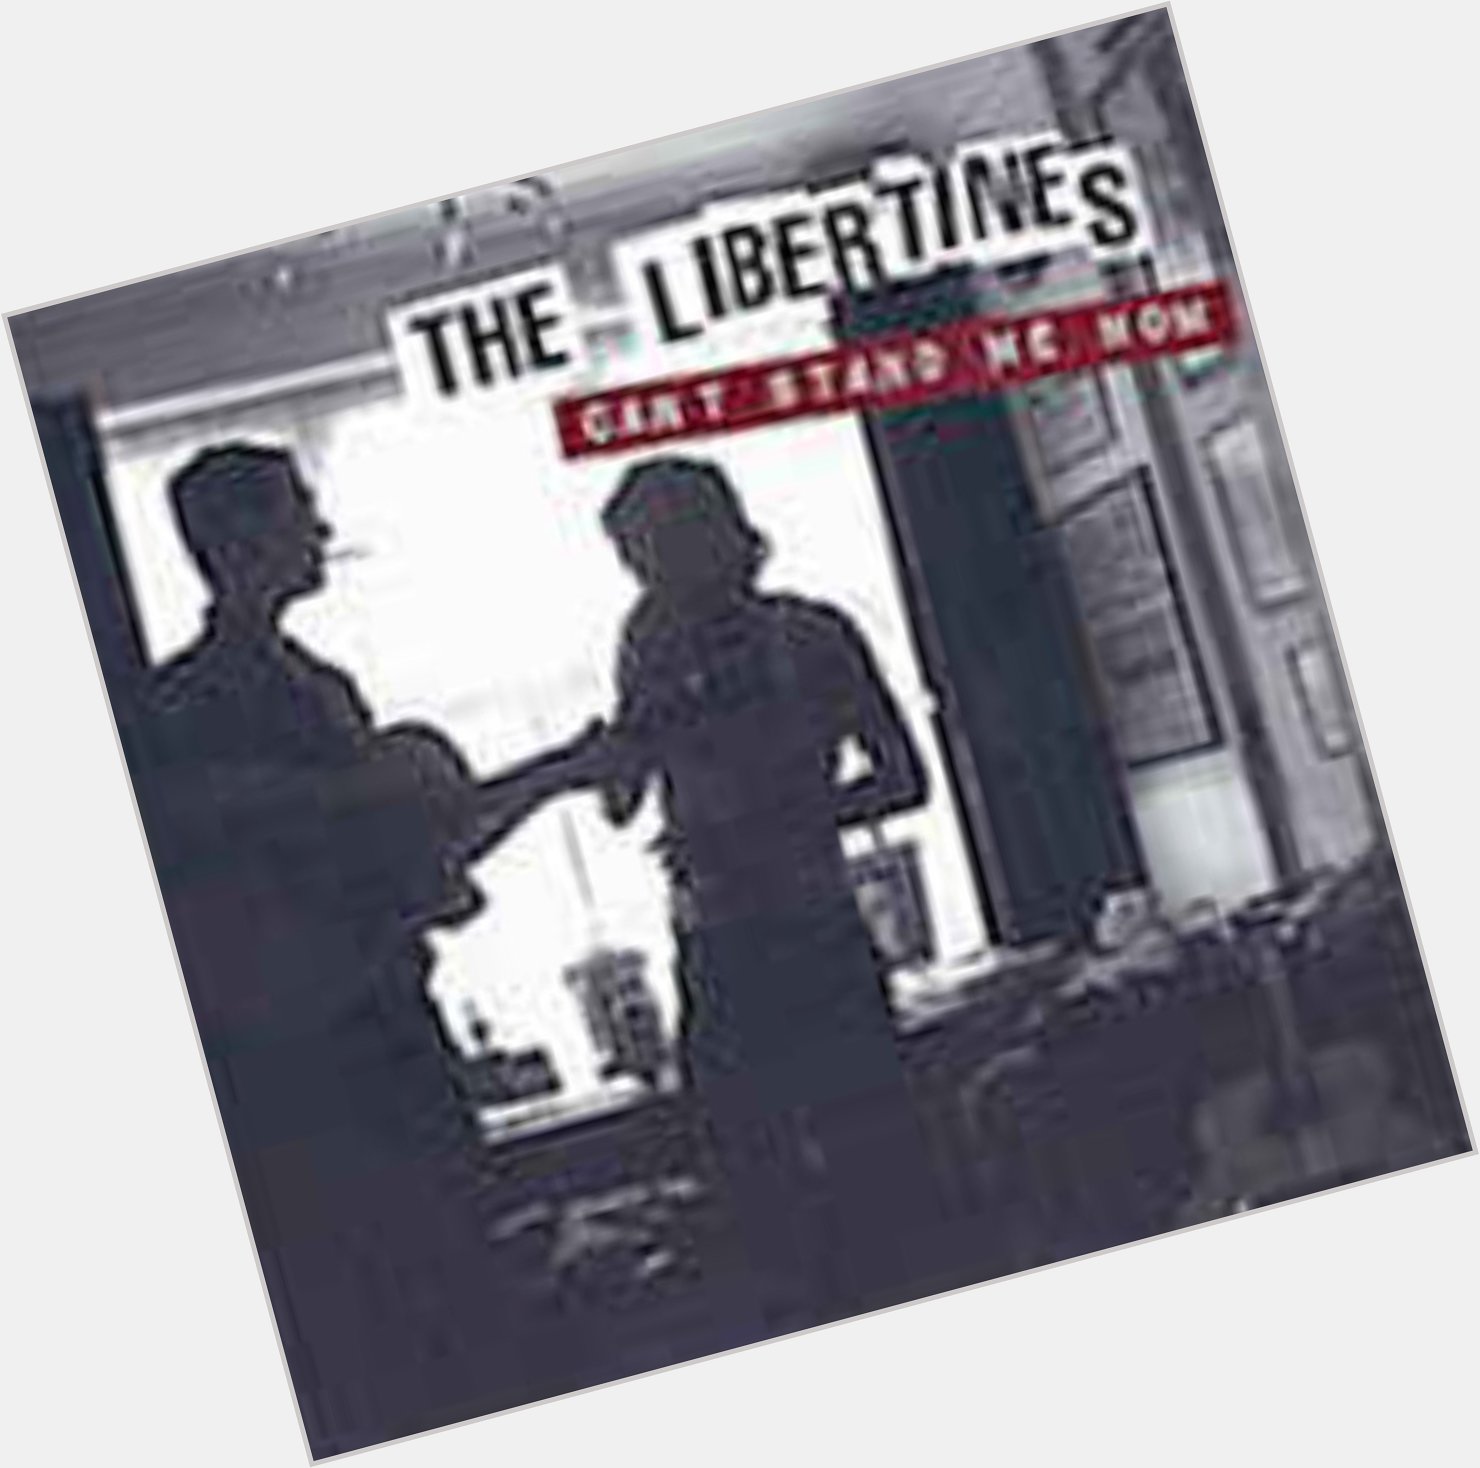 The Libertines Can t Stand Me Now Happy Birthday to Pete Doherty- glad you are still with us. 